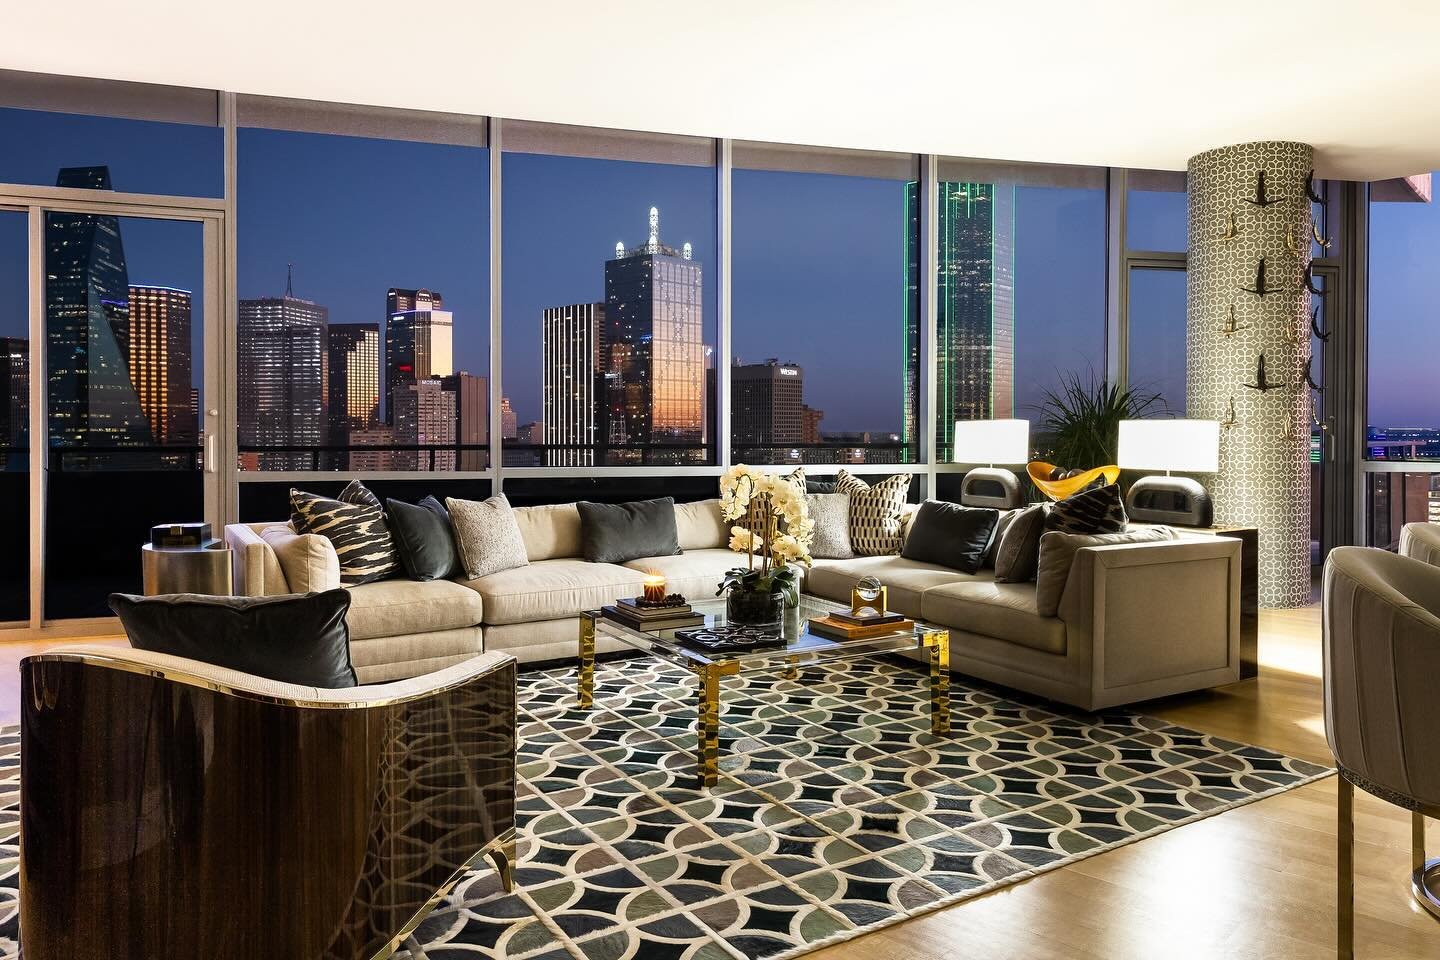 Rooms with killer Dallas views 😍 would you rather wake up to the skyline or end the day with a cocktail as the sun sets on the skyline? 

Image 1 &amp; 2 design by @karyndismoreinteriors 
Image 3 design by @urby 

#dallasinteriordesign #dallasview #